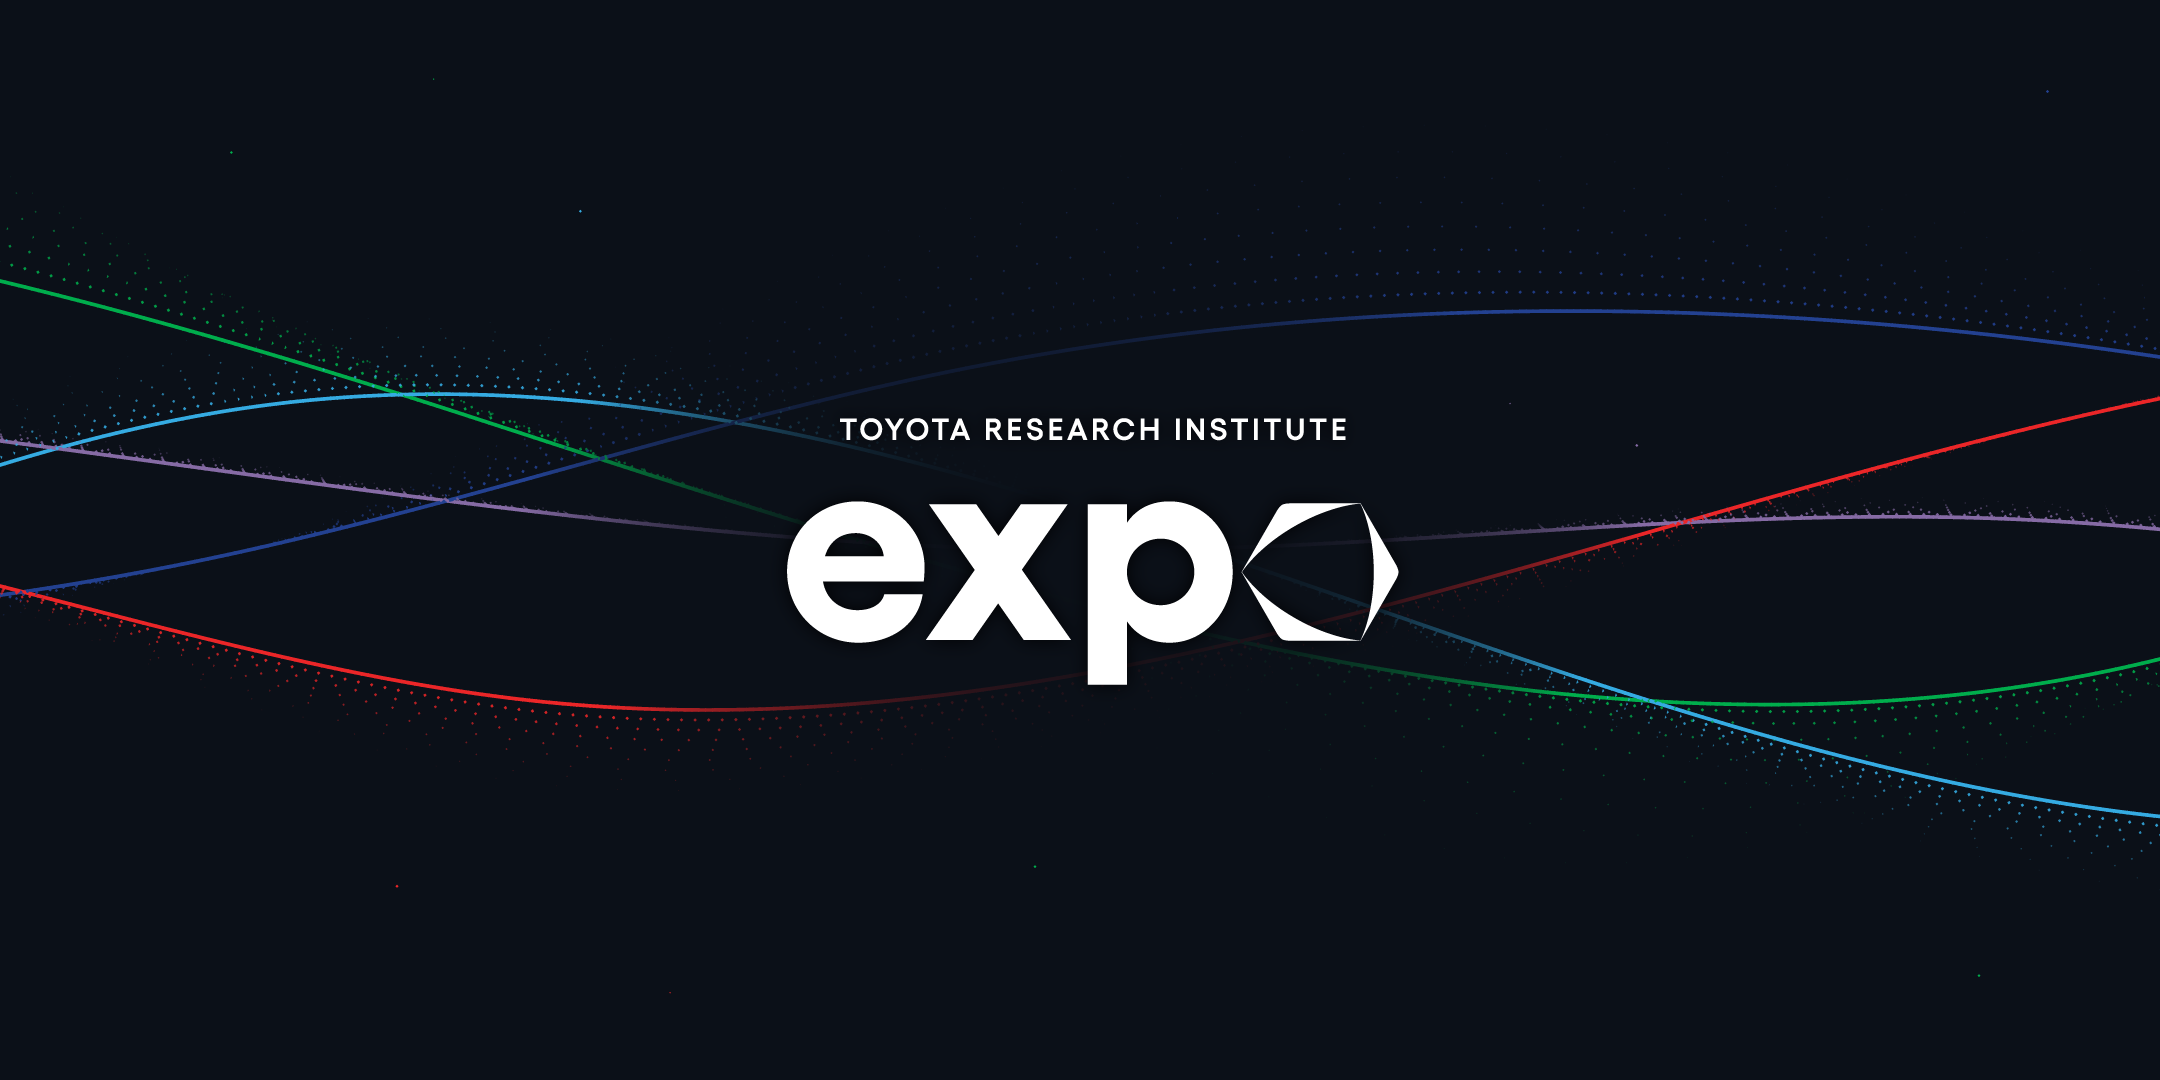 toyota research institute expo logo